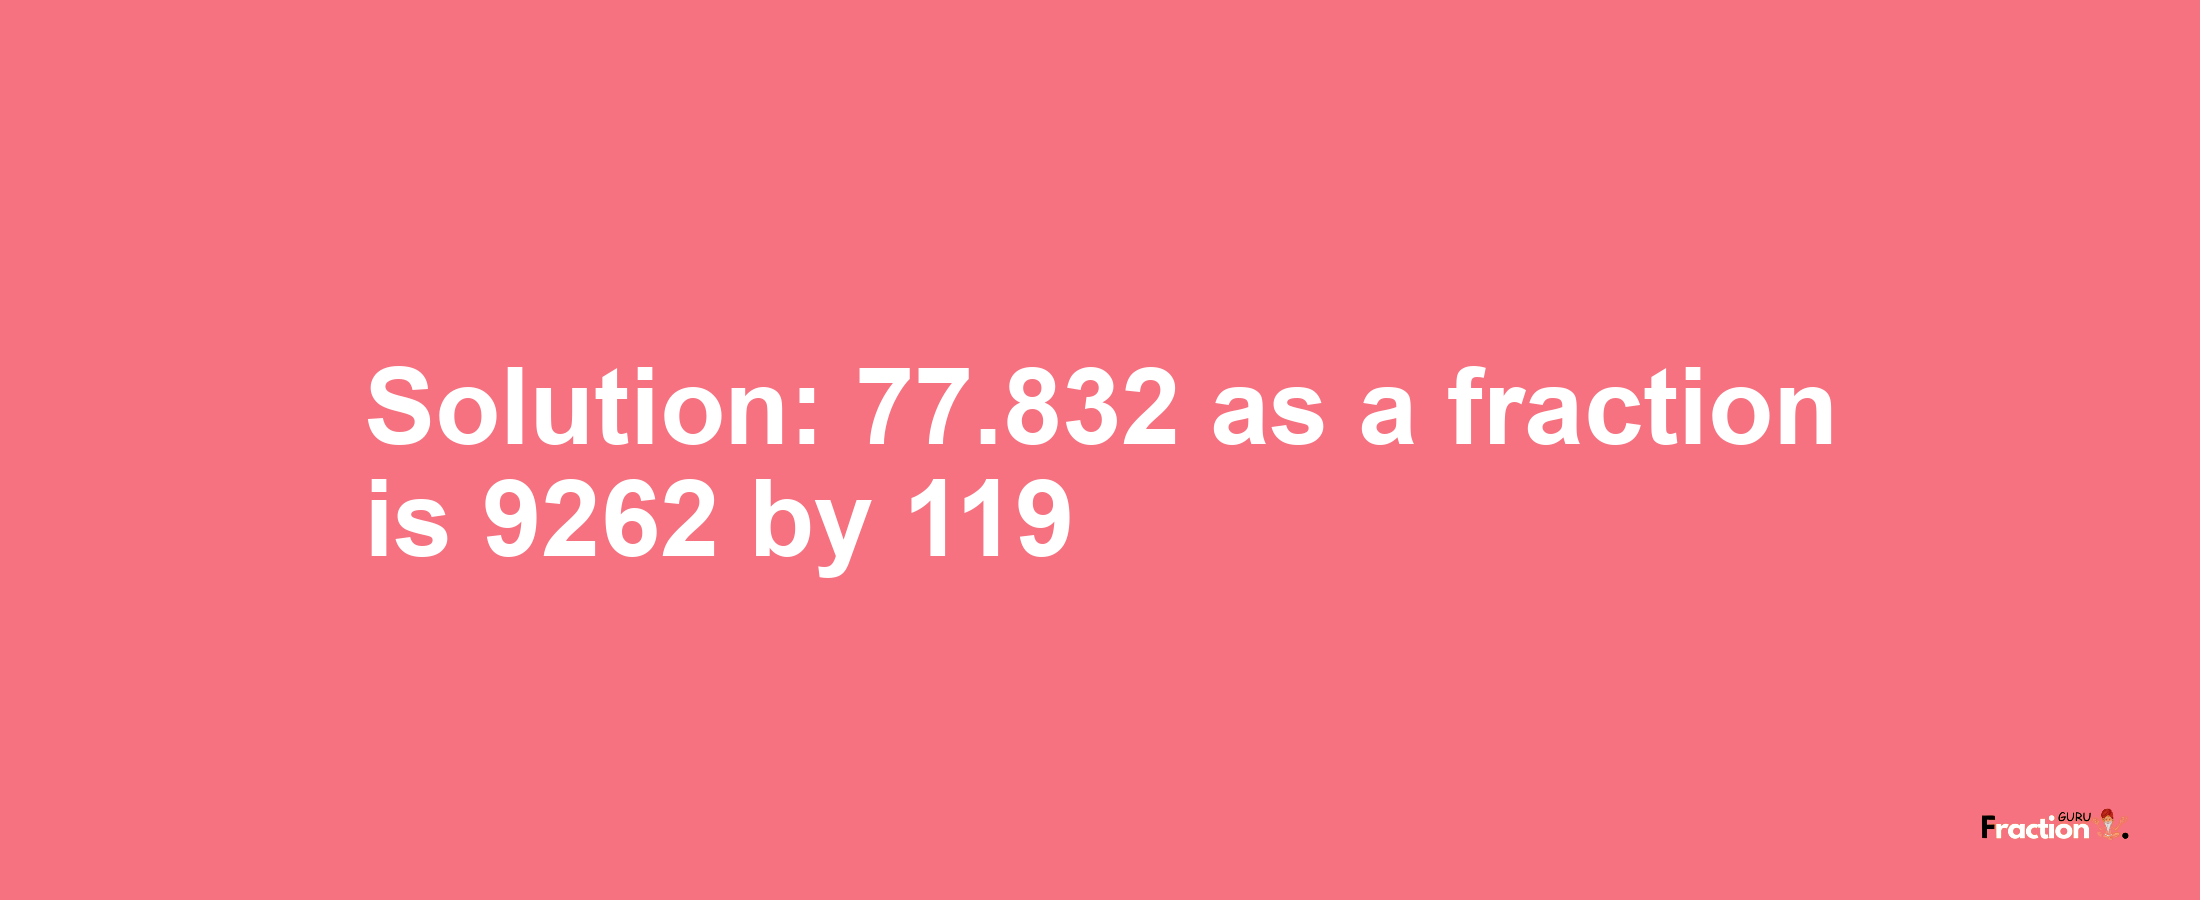 Solution:77.832 as a fraction is 9262/119